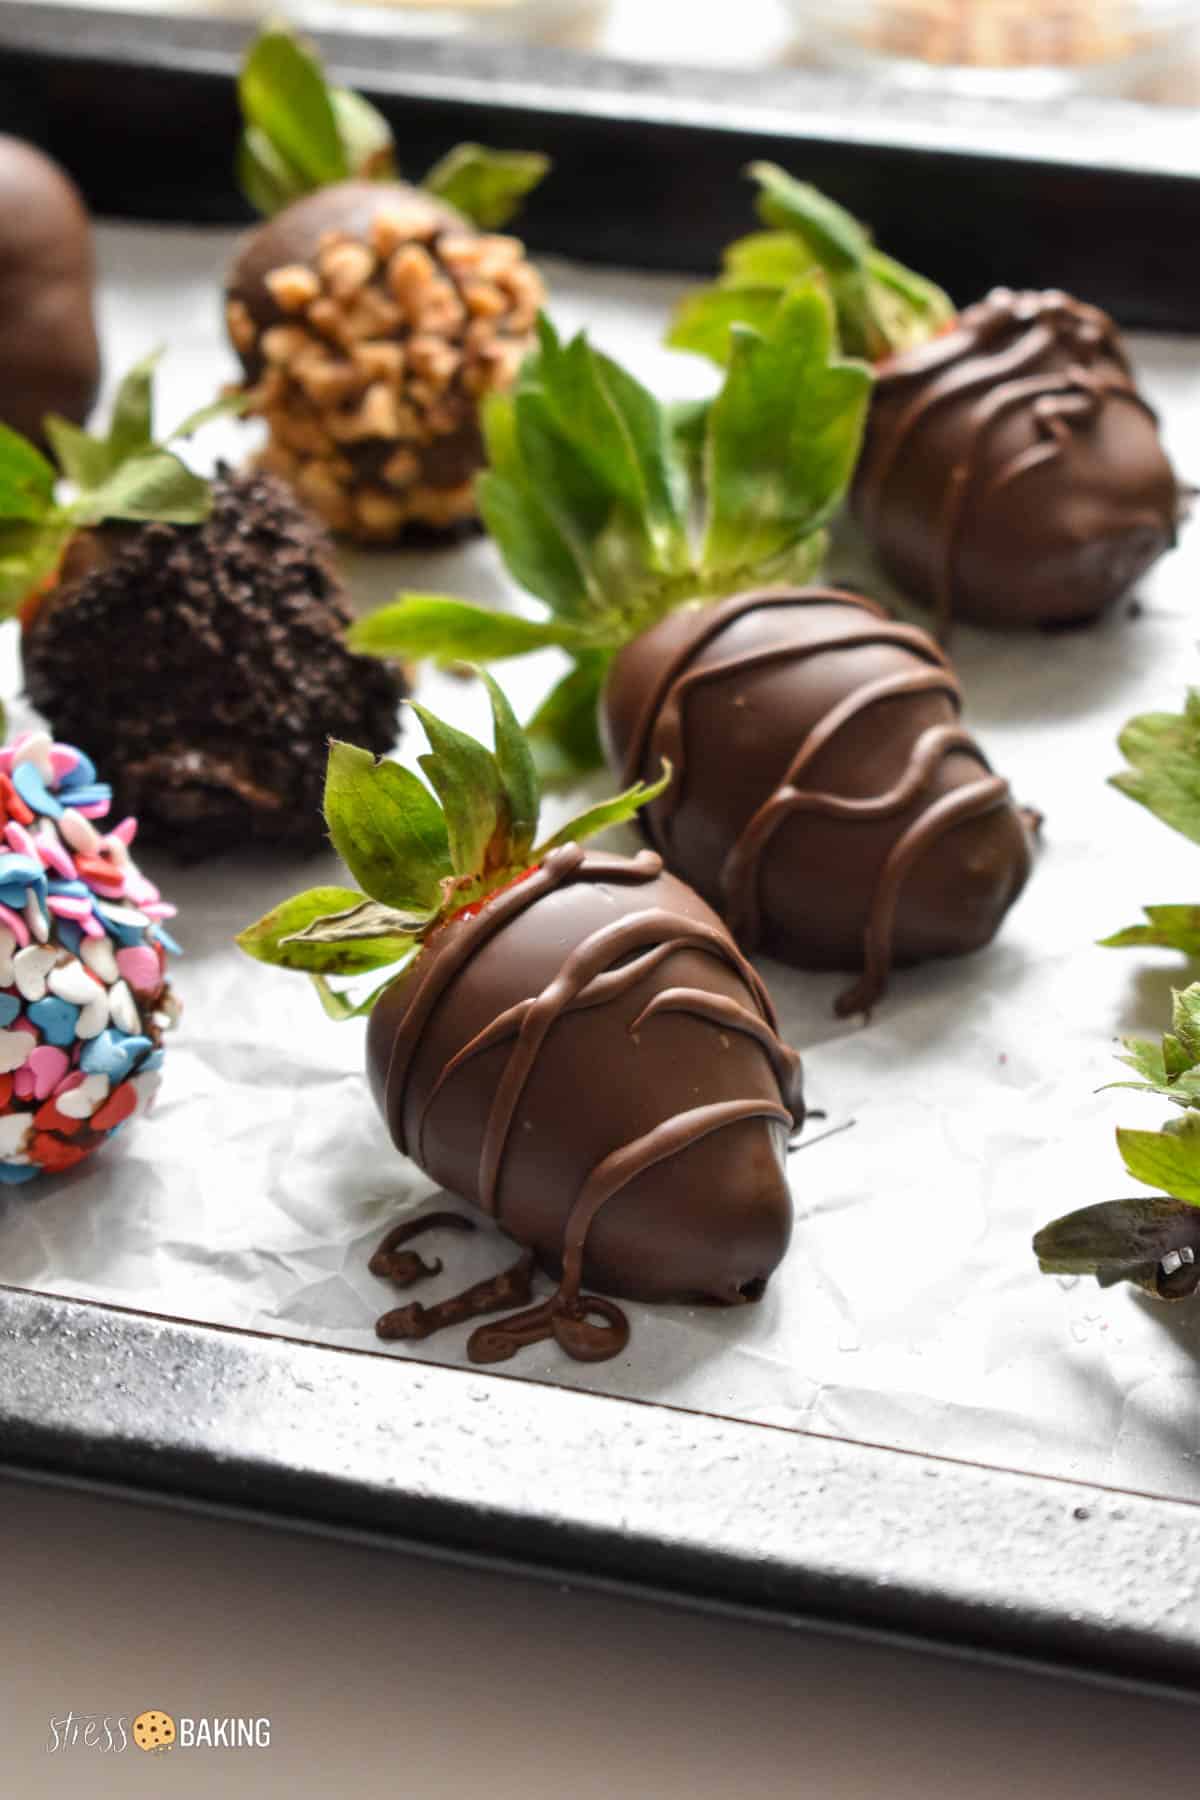 Decorated chocolate covered strawberries setting on parchment paper